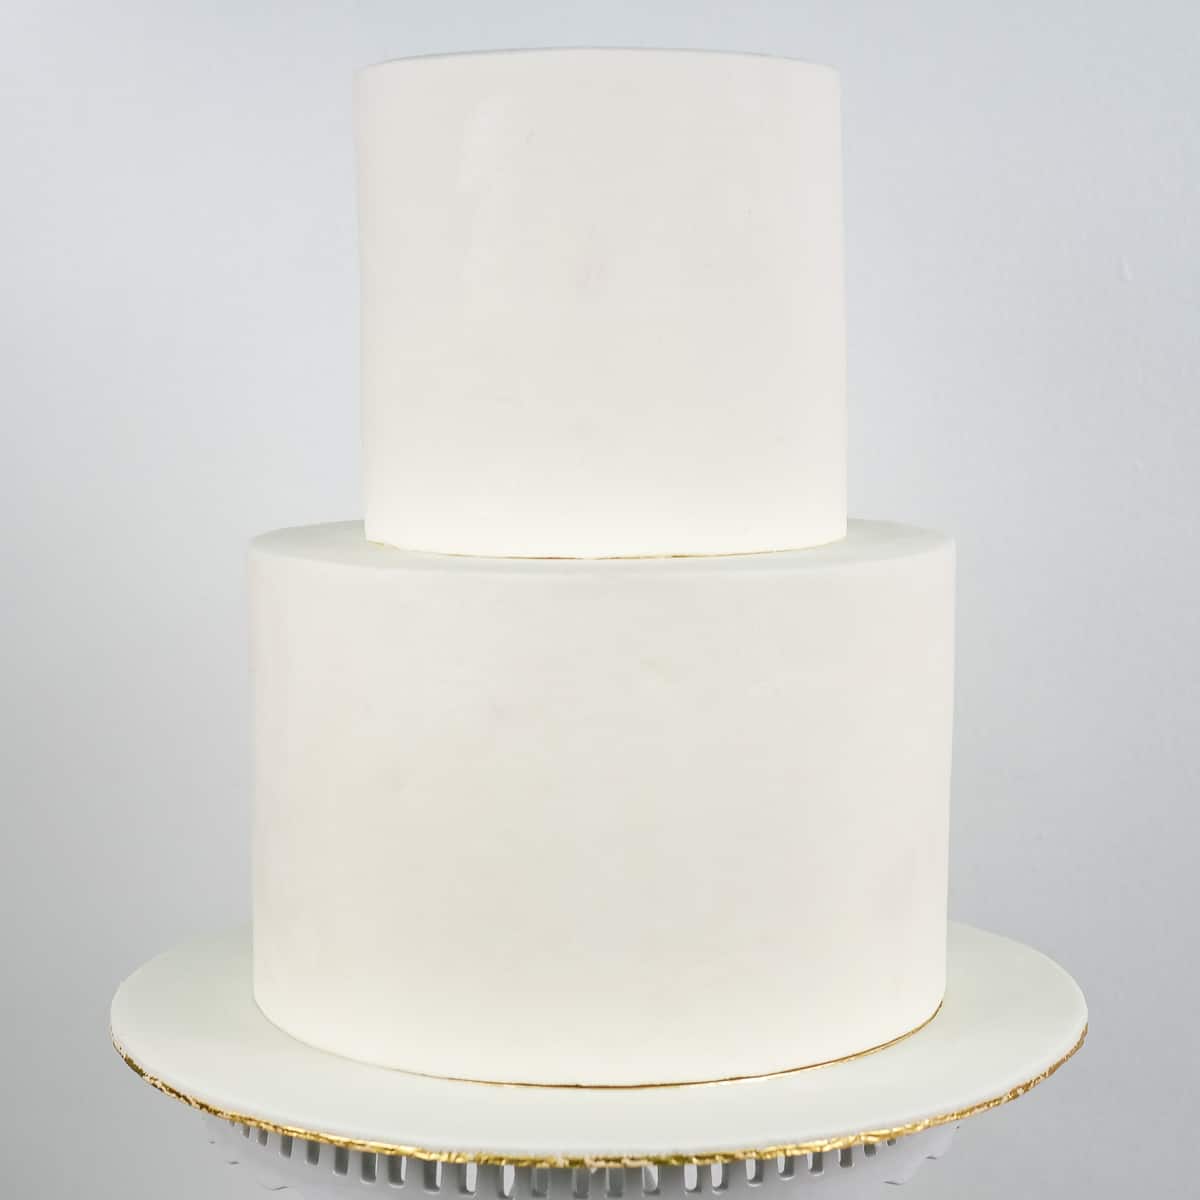 A 2 tier cake covered in white fondant